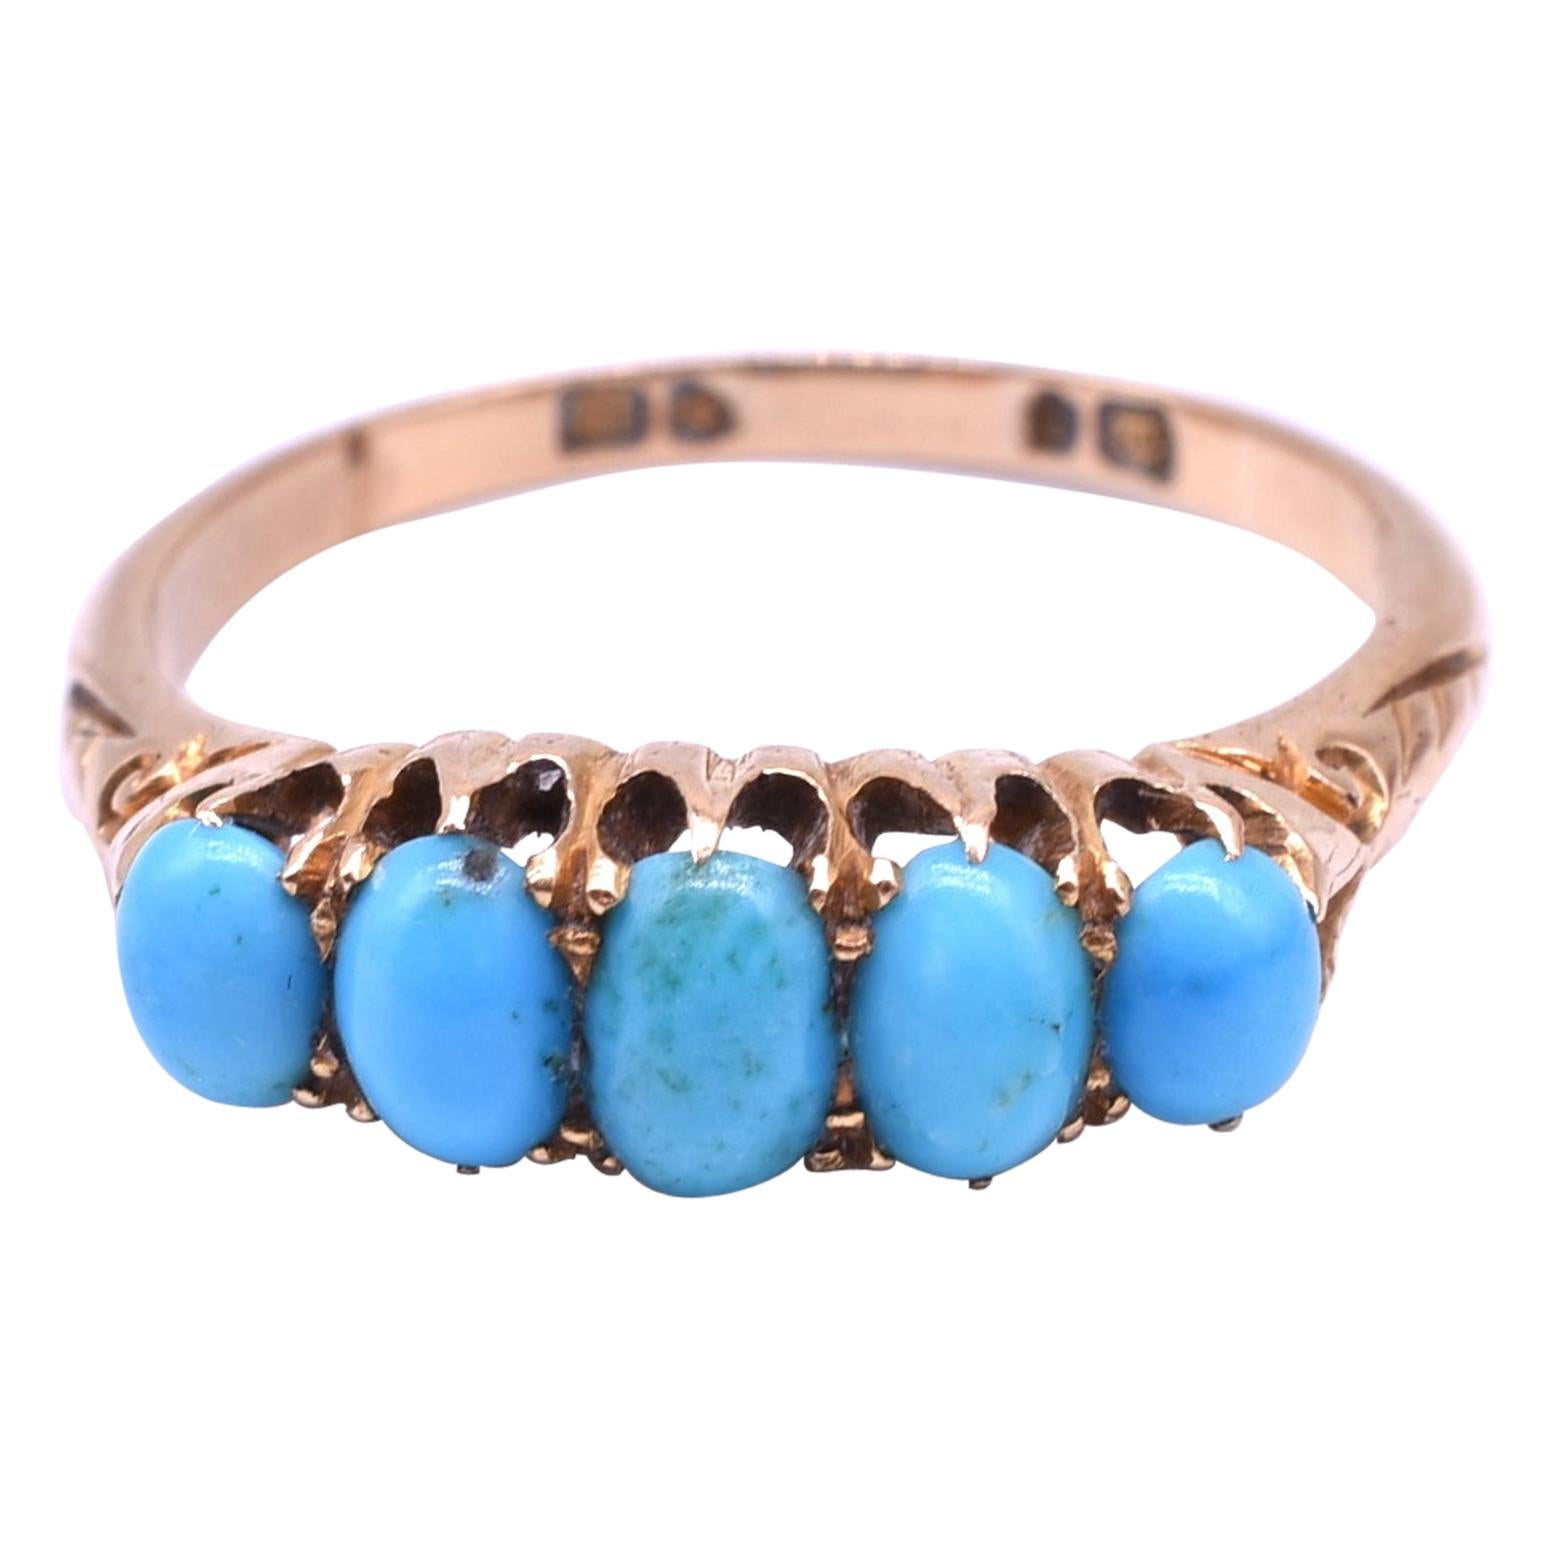 Antique 15K yellow gold Five-Stone Turquoise Ring hallmarked 1907